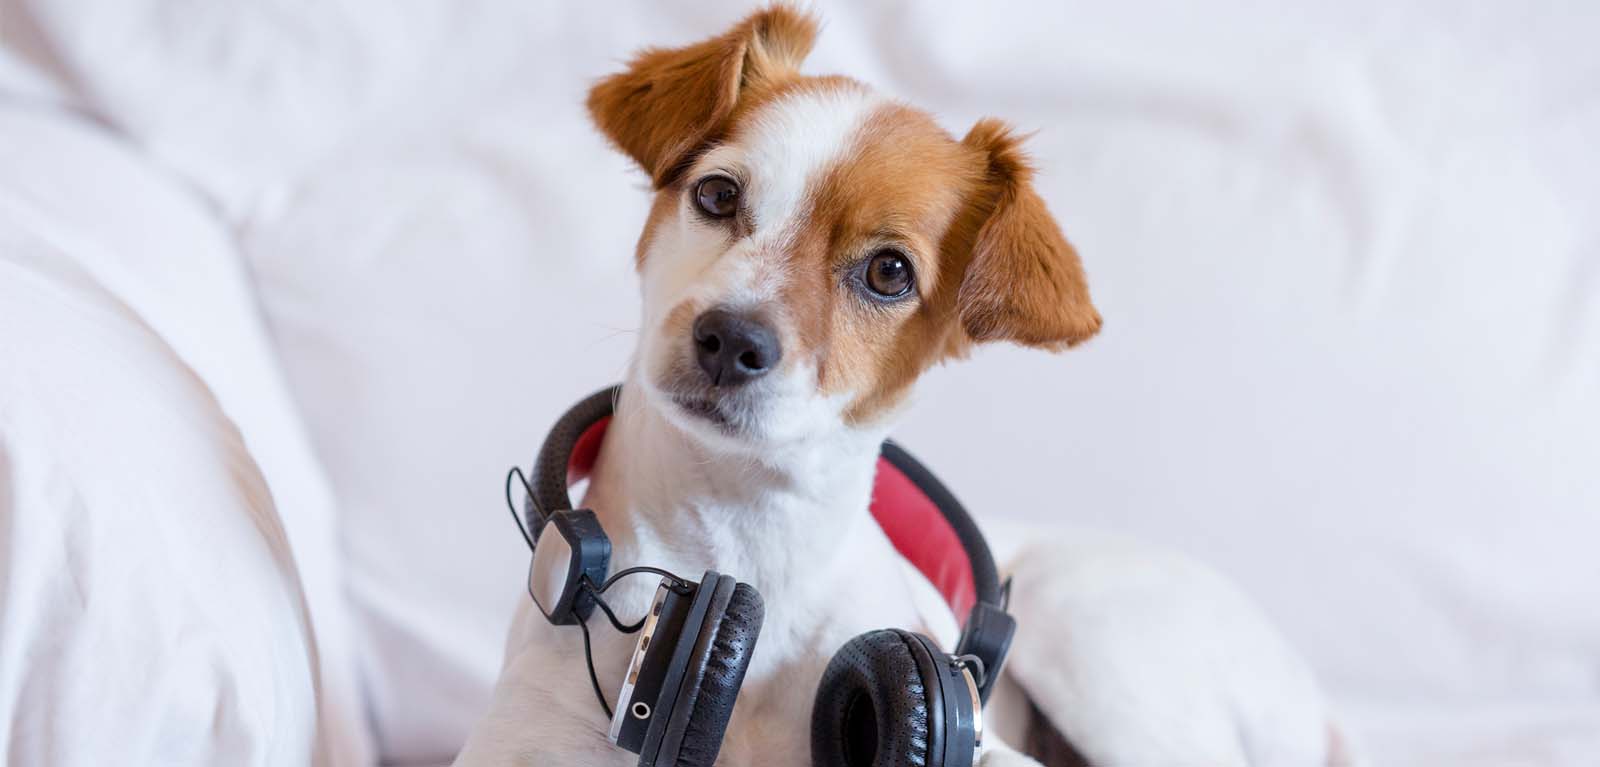 2022 | Classical music and audio books do not help dogs to relax when  separated from ow | News | Queen's University Belfast